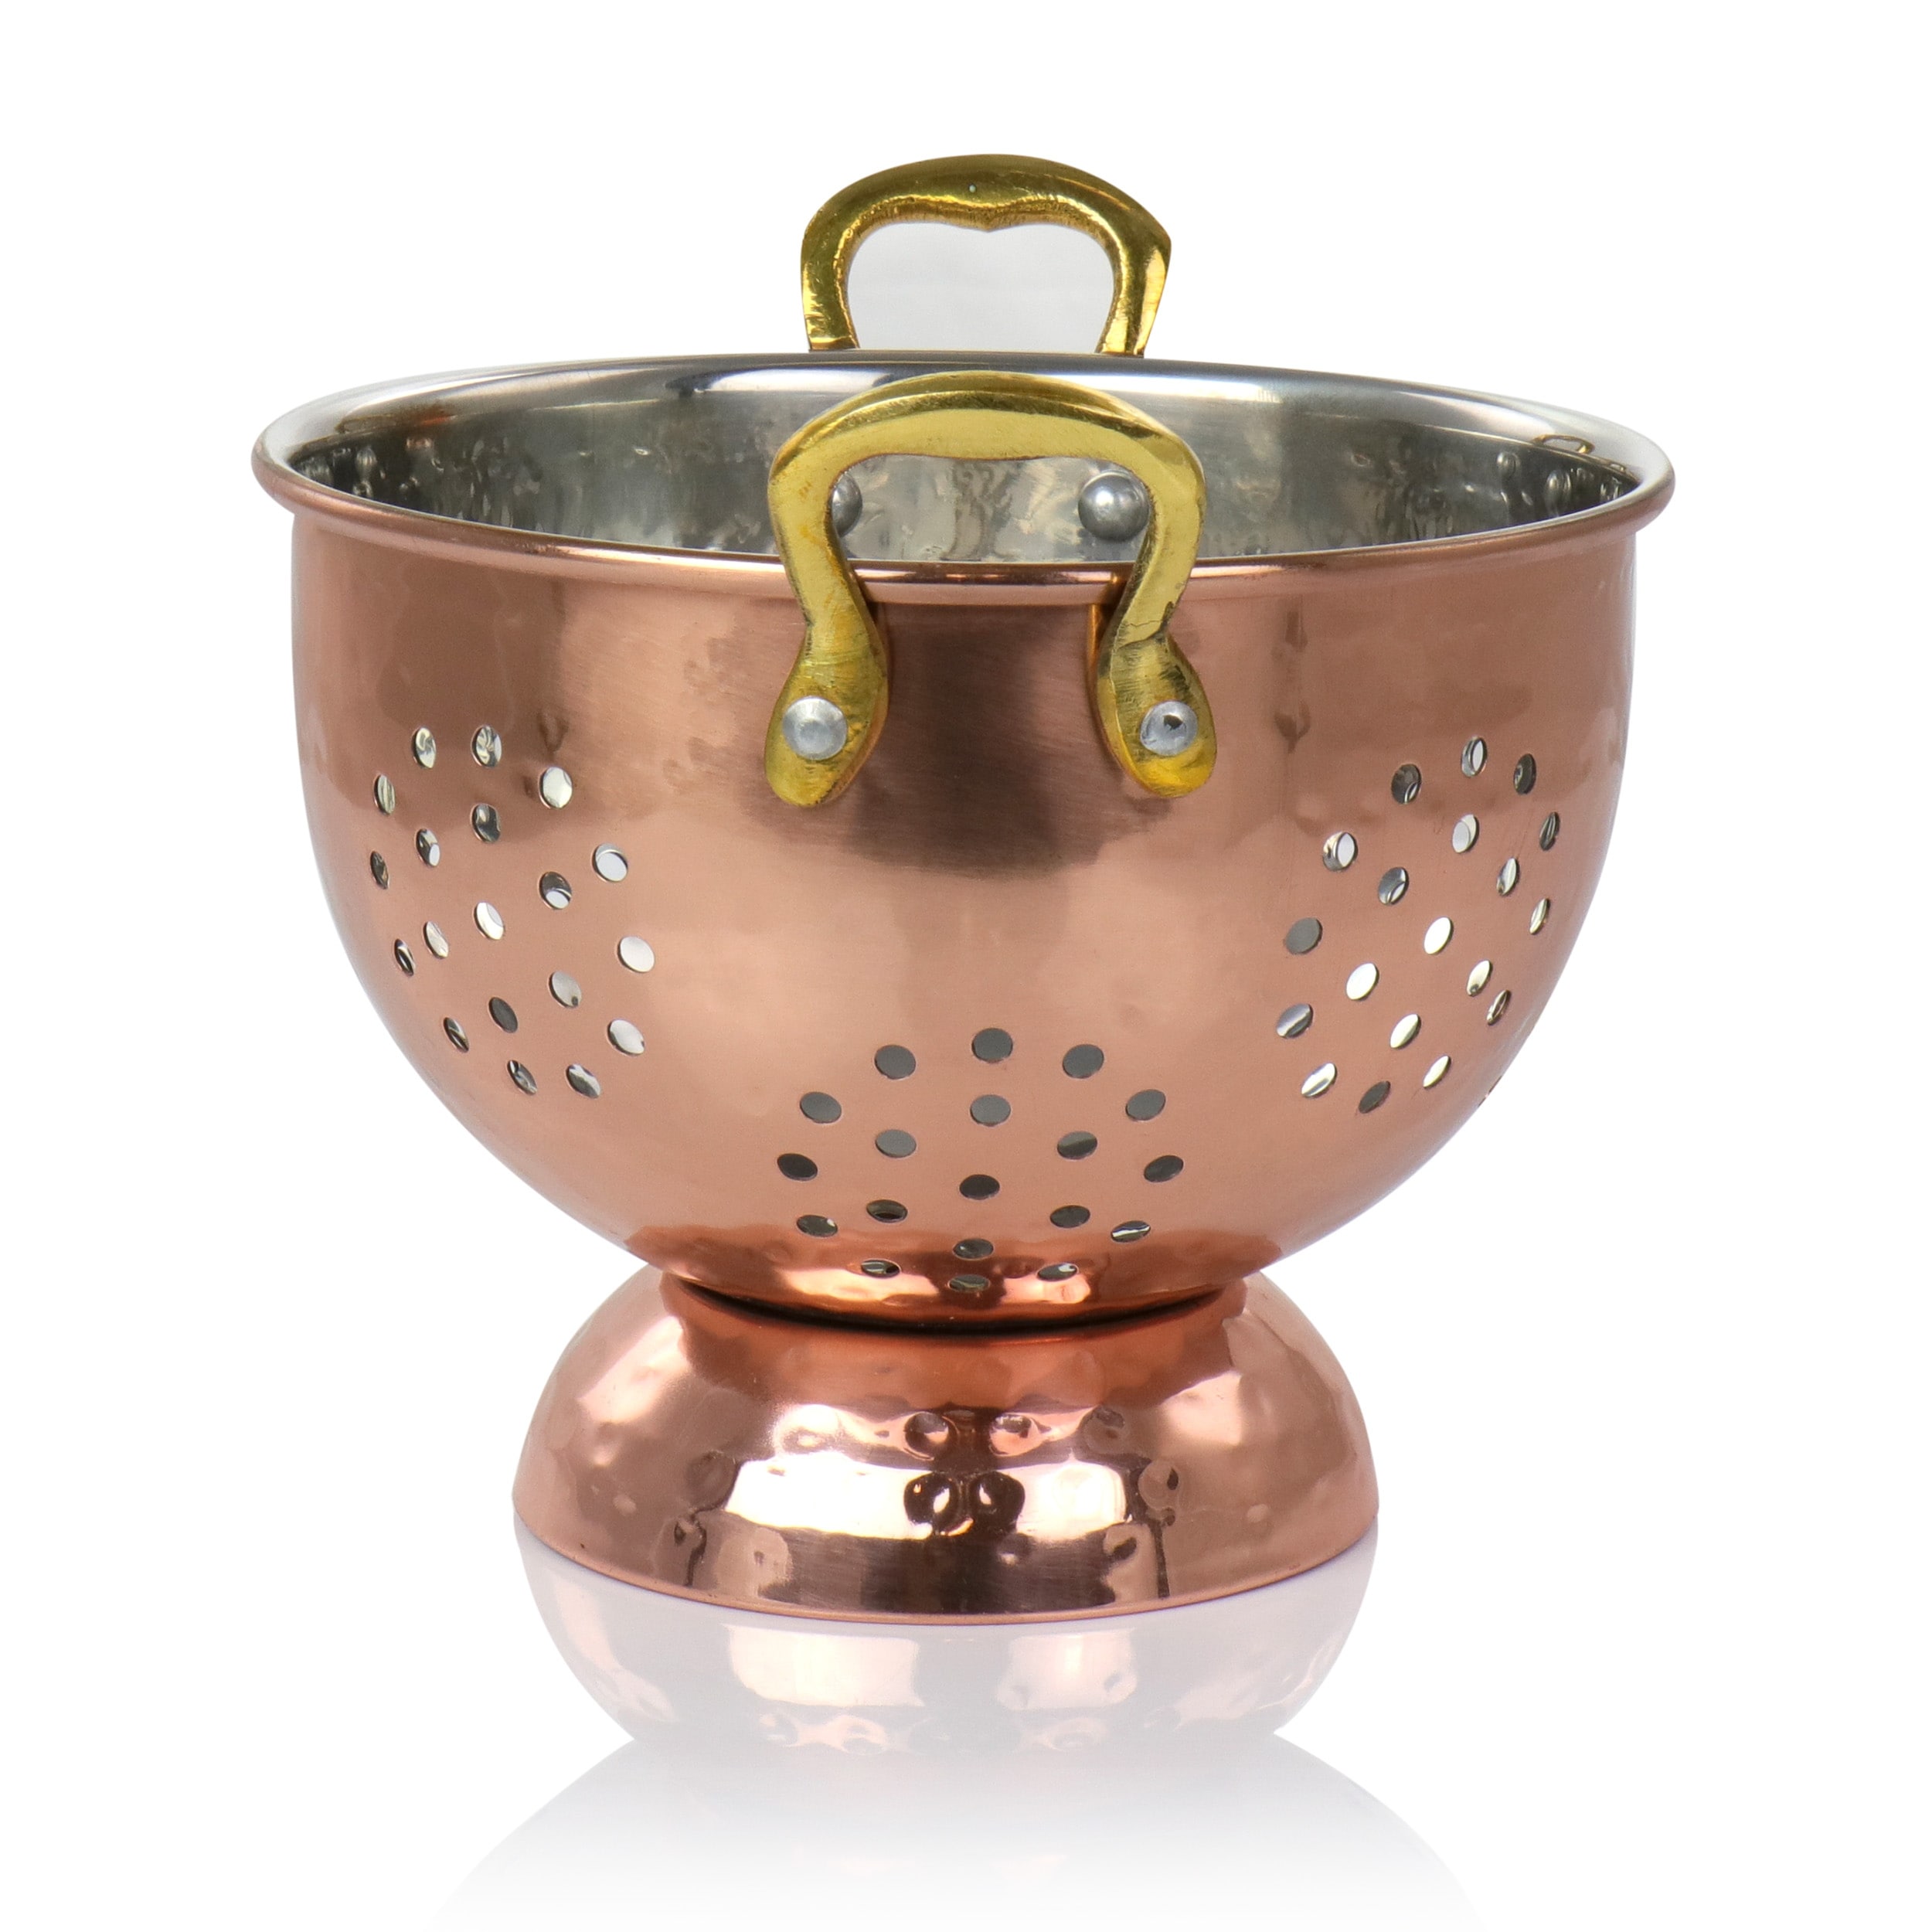 https://ak1.ostkcdn.com/images/products/is/images/direct/c6e7fb86fae3cc9cb37a134b20766a24eab438dd/Small-0.8-Quart-Stainless-Steel-Colander-in-Bronze.jpg